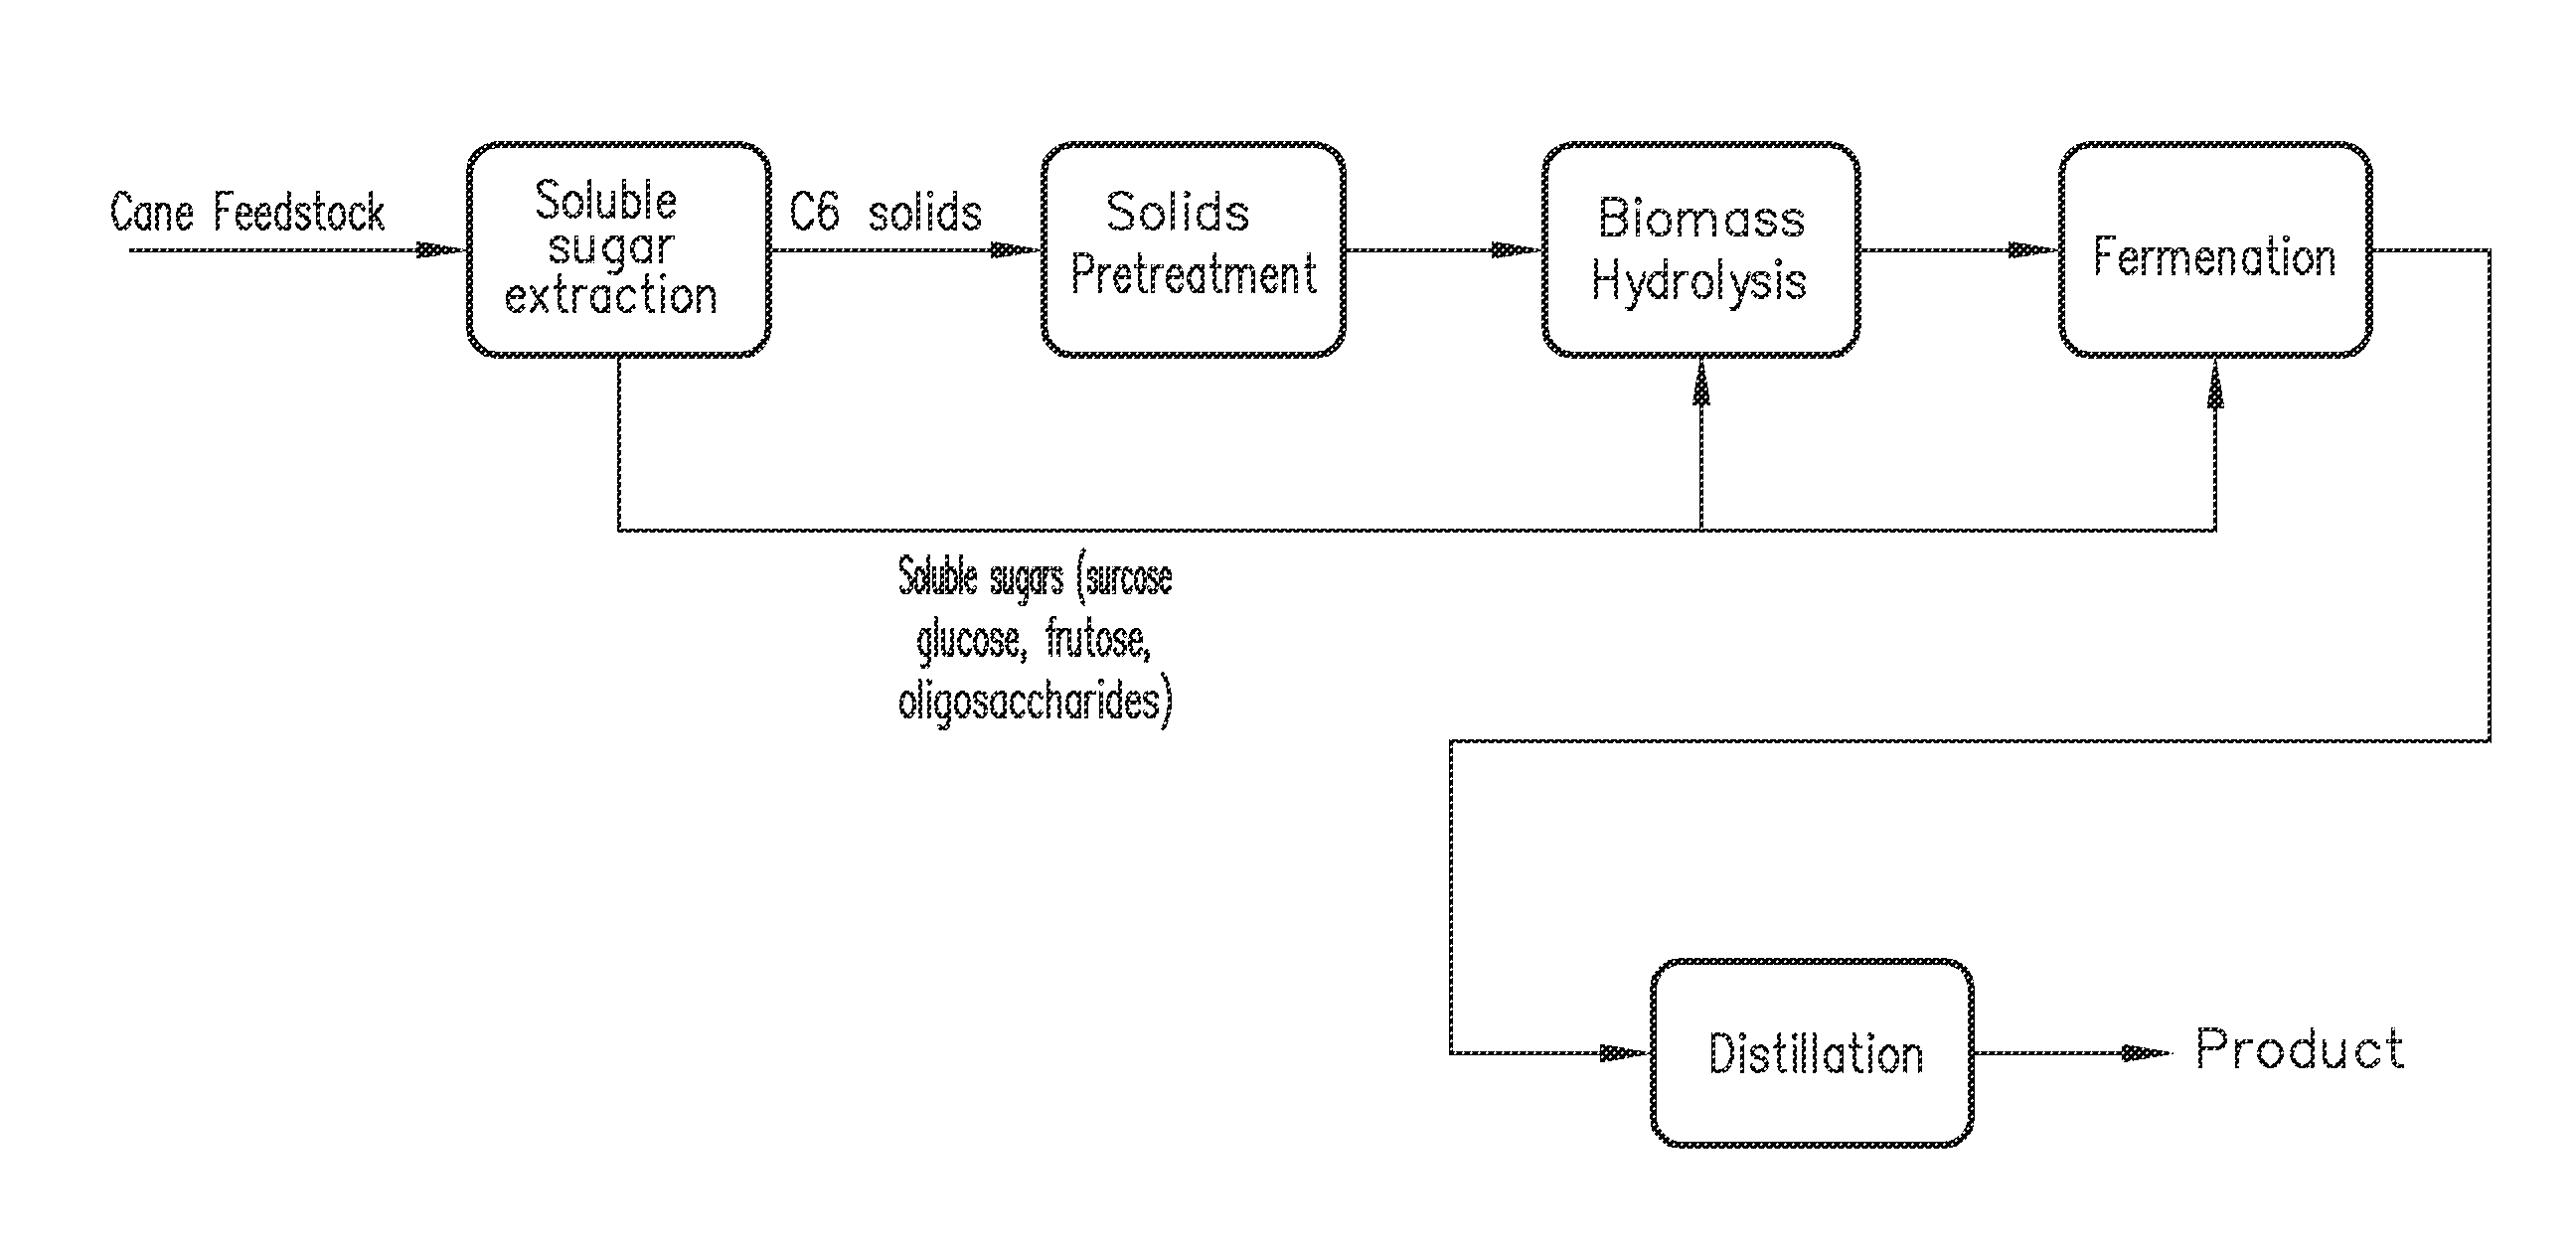 Liquid co-extraction process for production of sucrose, xylo-oligosaccharides and xylose from feedstock